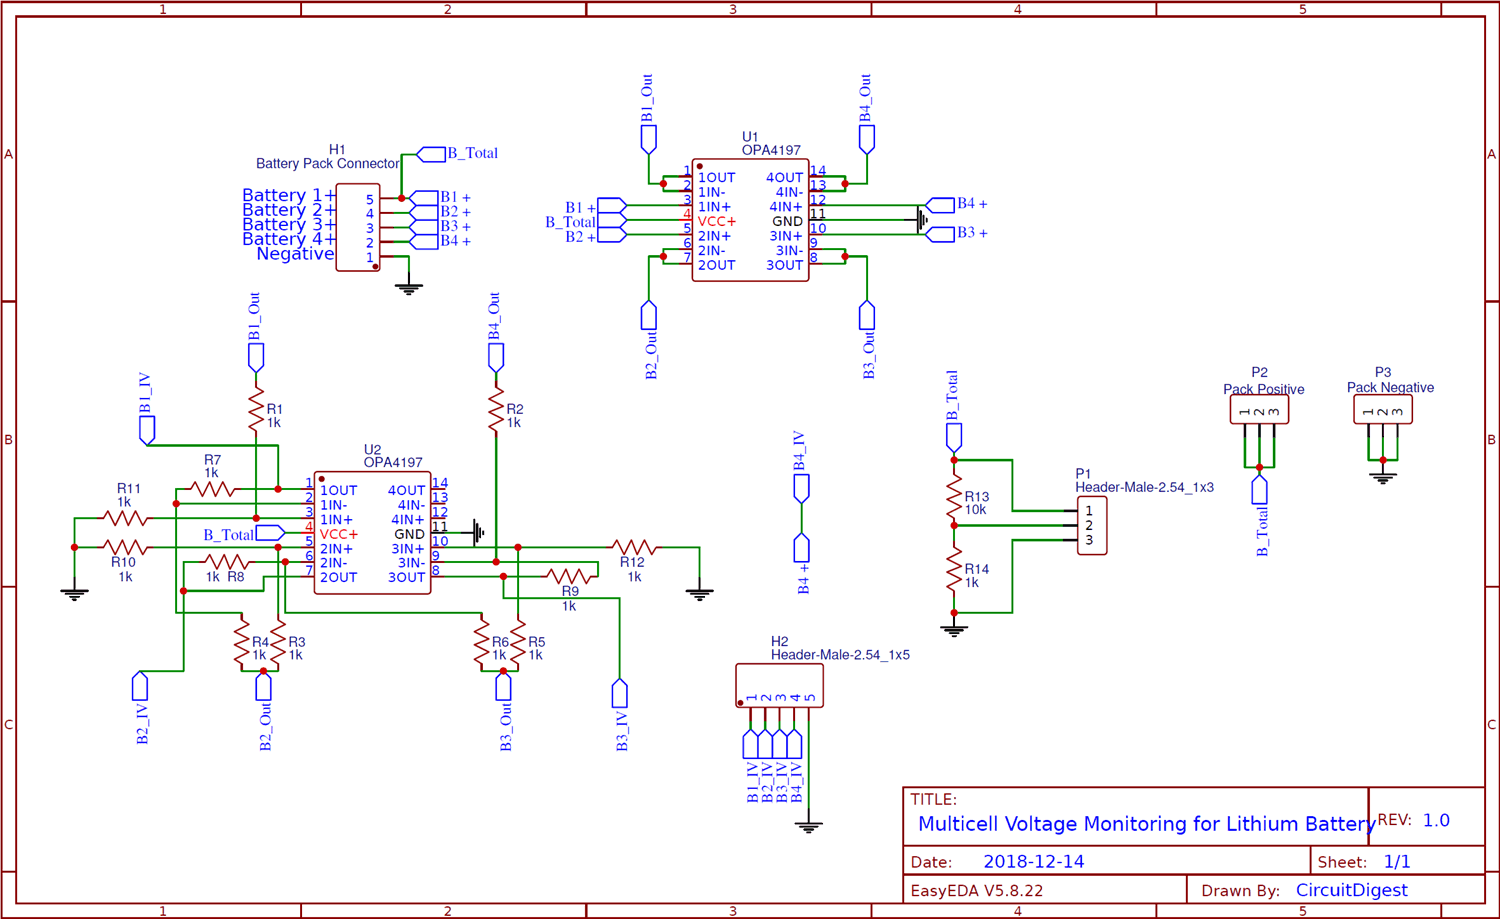 Circuit Diagram for Multicell Voltage Monitoring for Lithium Battery Pack in Electric Vehicles